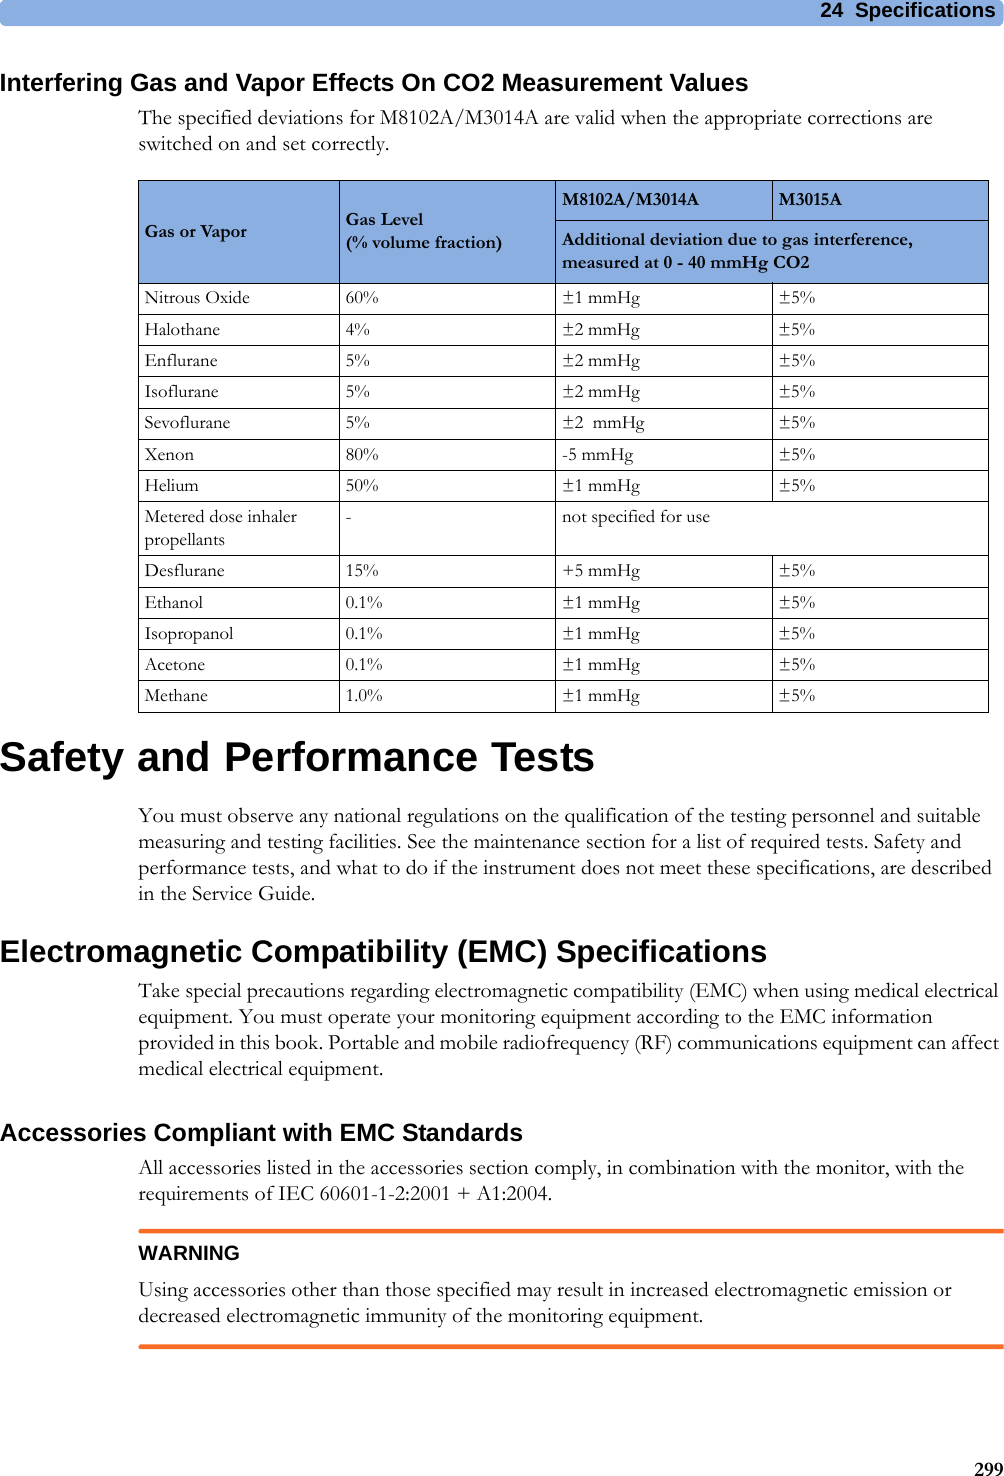 24 Specifications299Interfering Gas and Vapor Effects On CO2 Measurement ValuesThe specified deviations for M8102A/M3014A are valid when the appropriate corrections are switched on and set correctly.Safety and Performance TestsYou must observe any national regulations on the qualification of the testing personnel and suitable measuring and testing facilities. See the maintenance section for a list of required tests. Safety and performance tests, and what to do if the instrument does not meet these specifications, are described in the Service Guide.Electromagnetic Compatibility (EMC) SpecificationsTake special precautions regarding electromagnetic compatibility (EMC) when using medical electrical equipment. You must operate your monitoring equipment according to the EMC information provided in this book. Portable and mobile radiofrequency (RF) communications equipment can affect medical electrical equipment.Accessories Compliant with EMC StandardsAll accessories listed in the accessories section comply, in combination with the monitor, with the requirements of IEC 60601-1-2:2001 + A1:2004.WARNINGUsing accessories other than those specified may result in increased electromagnetic emission or decreased electromagnetic immunity of the monitoring equipment.Gas or Vapor Gas Level (% volume fraction)M8102A/M3014A M3015AAdditional deviation due to gas interference, measured at 0 - 40 mmHg CO2Nitrous Oxide 60% ±1 mmHg ±5%Halothane 4% ±2 mmHg ±5%Enflurane 5% ±2 mmHg ±5%Isoflurane 5% ±2 mmHg ±5%Sevoflurane 5% ±2  mmHg ±5%Xenon 80% -5 mmHg ±5%Helium 50% ±1 mmHg ±5%Metered dose inhaler propellants- not specified for useDesflurane 15% +5 mmHg ±5%Ethanol 0.1% ±1 mmHg ±5%Isopropanol 0.1% ±1 mmHg ±5%Acetone 0.1% ±1 mmHg ±5%Methane 1.0% ±1 mmHg ±5%